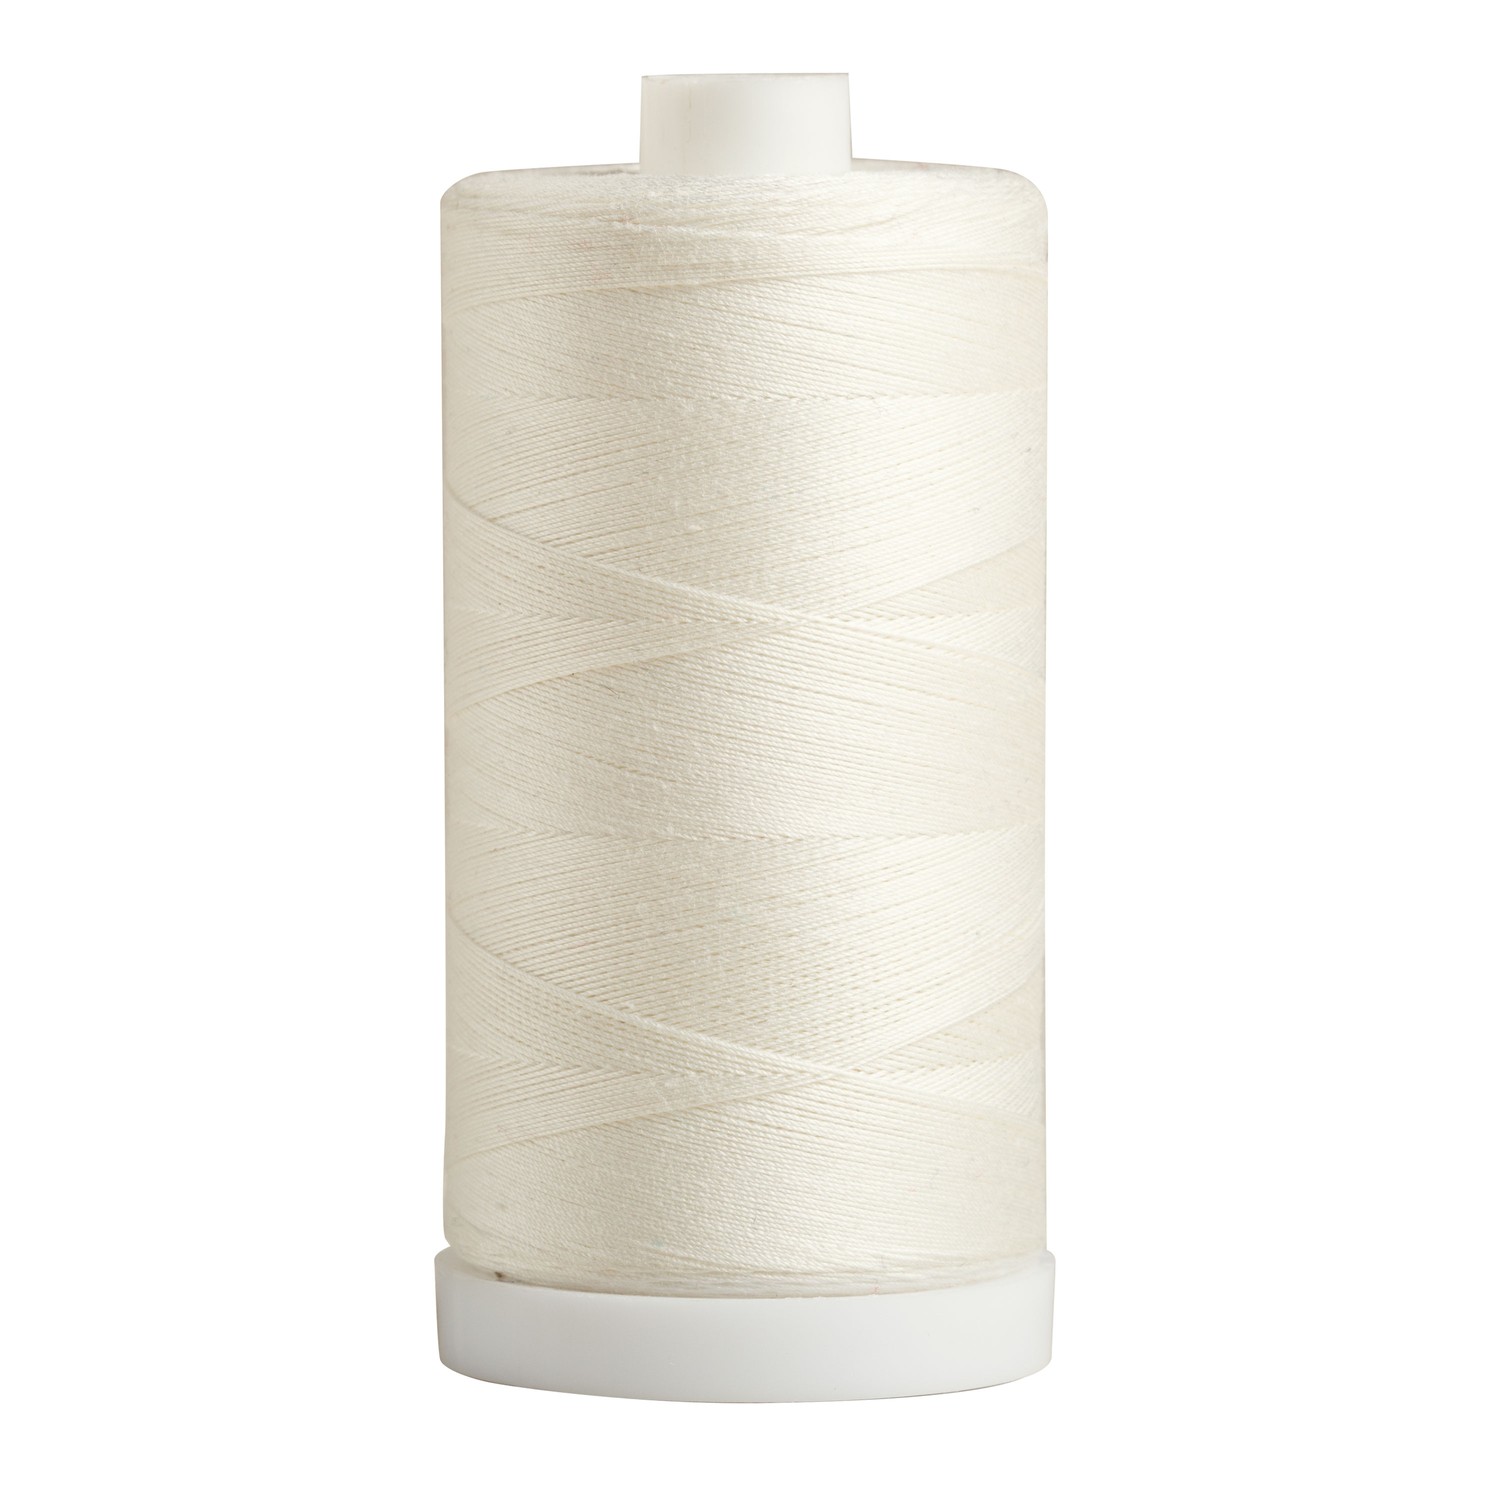 Essential Cotton Quilting Thread from Connecting Threads